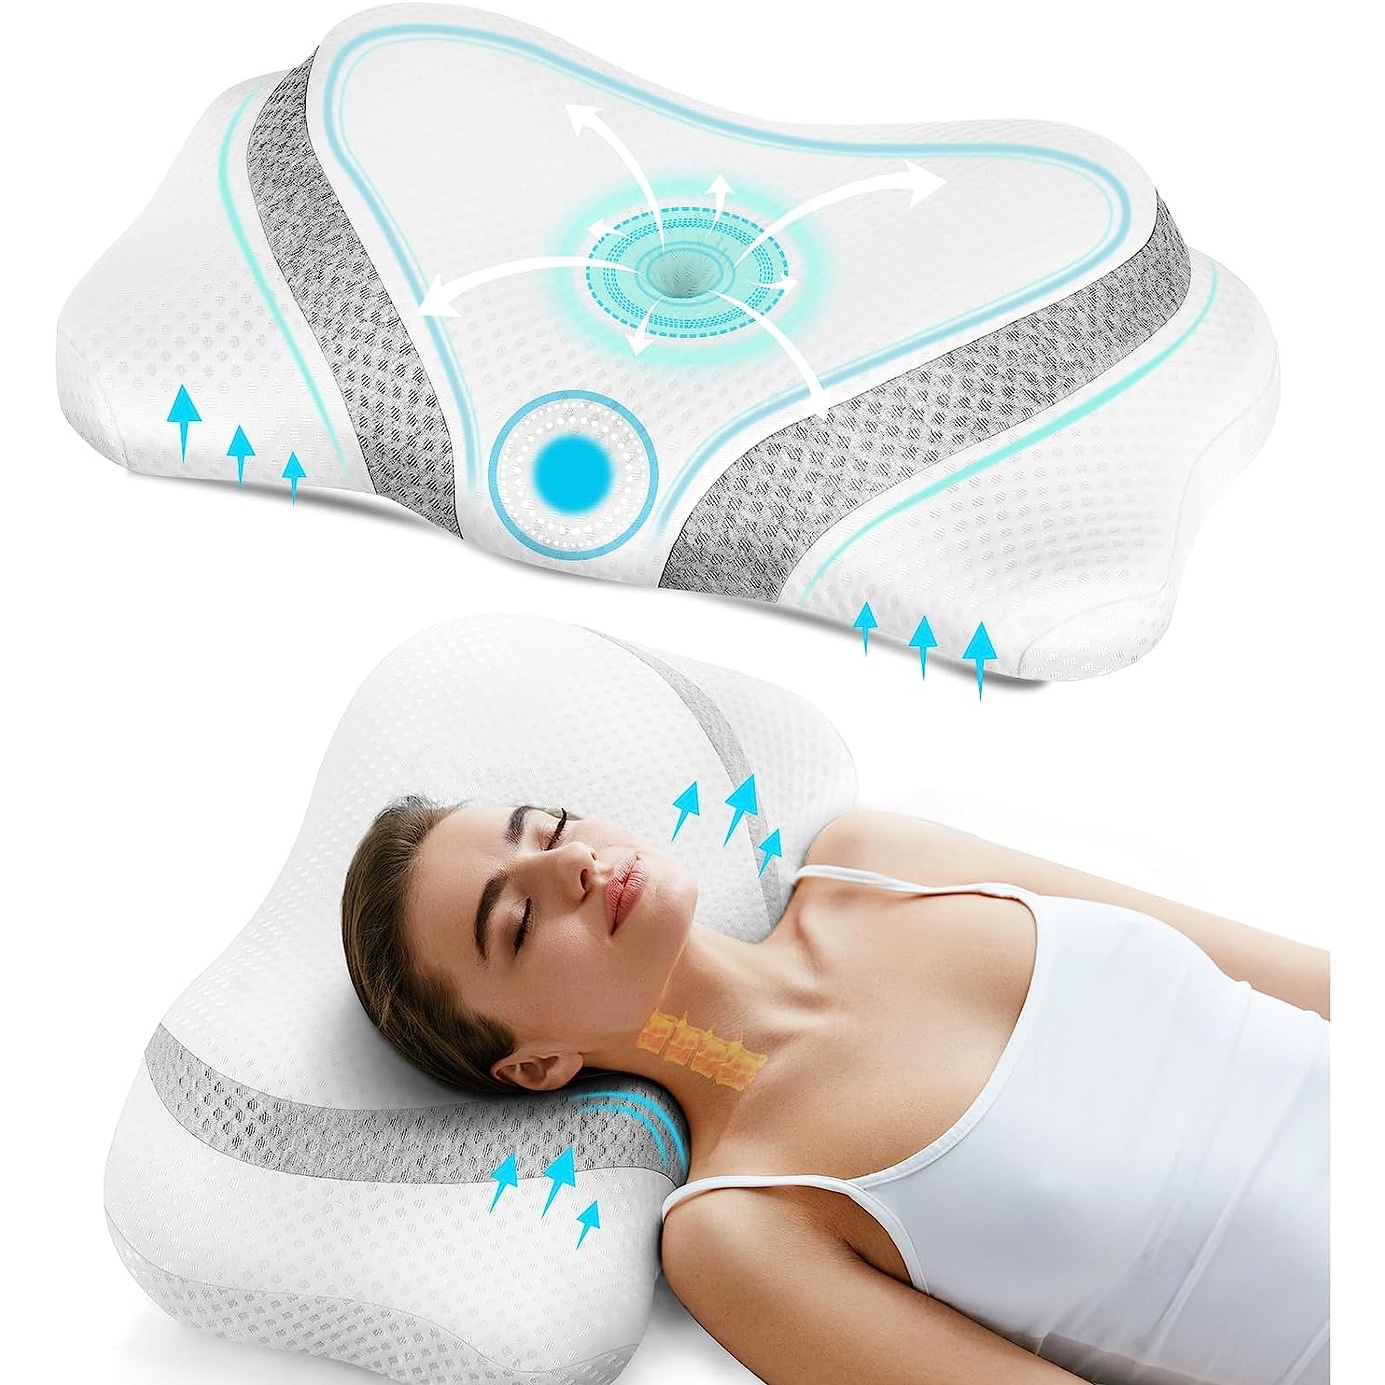 SMUGDESK Gel Memory Foam Contour Pillow Neck Pillows for Pain Relief  Sleeping, Cooling Gel Cervical Pillow for Neck Pain - Bed Bath & Beyond -  33900015